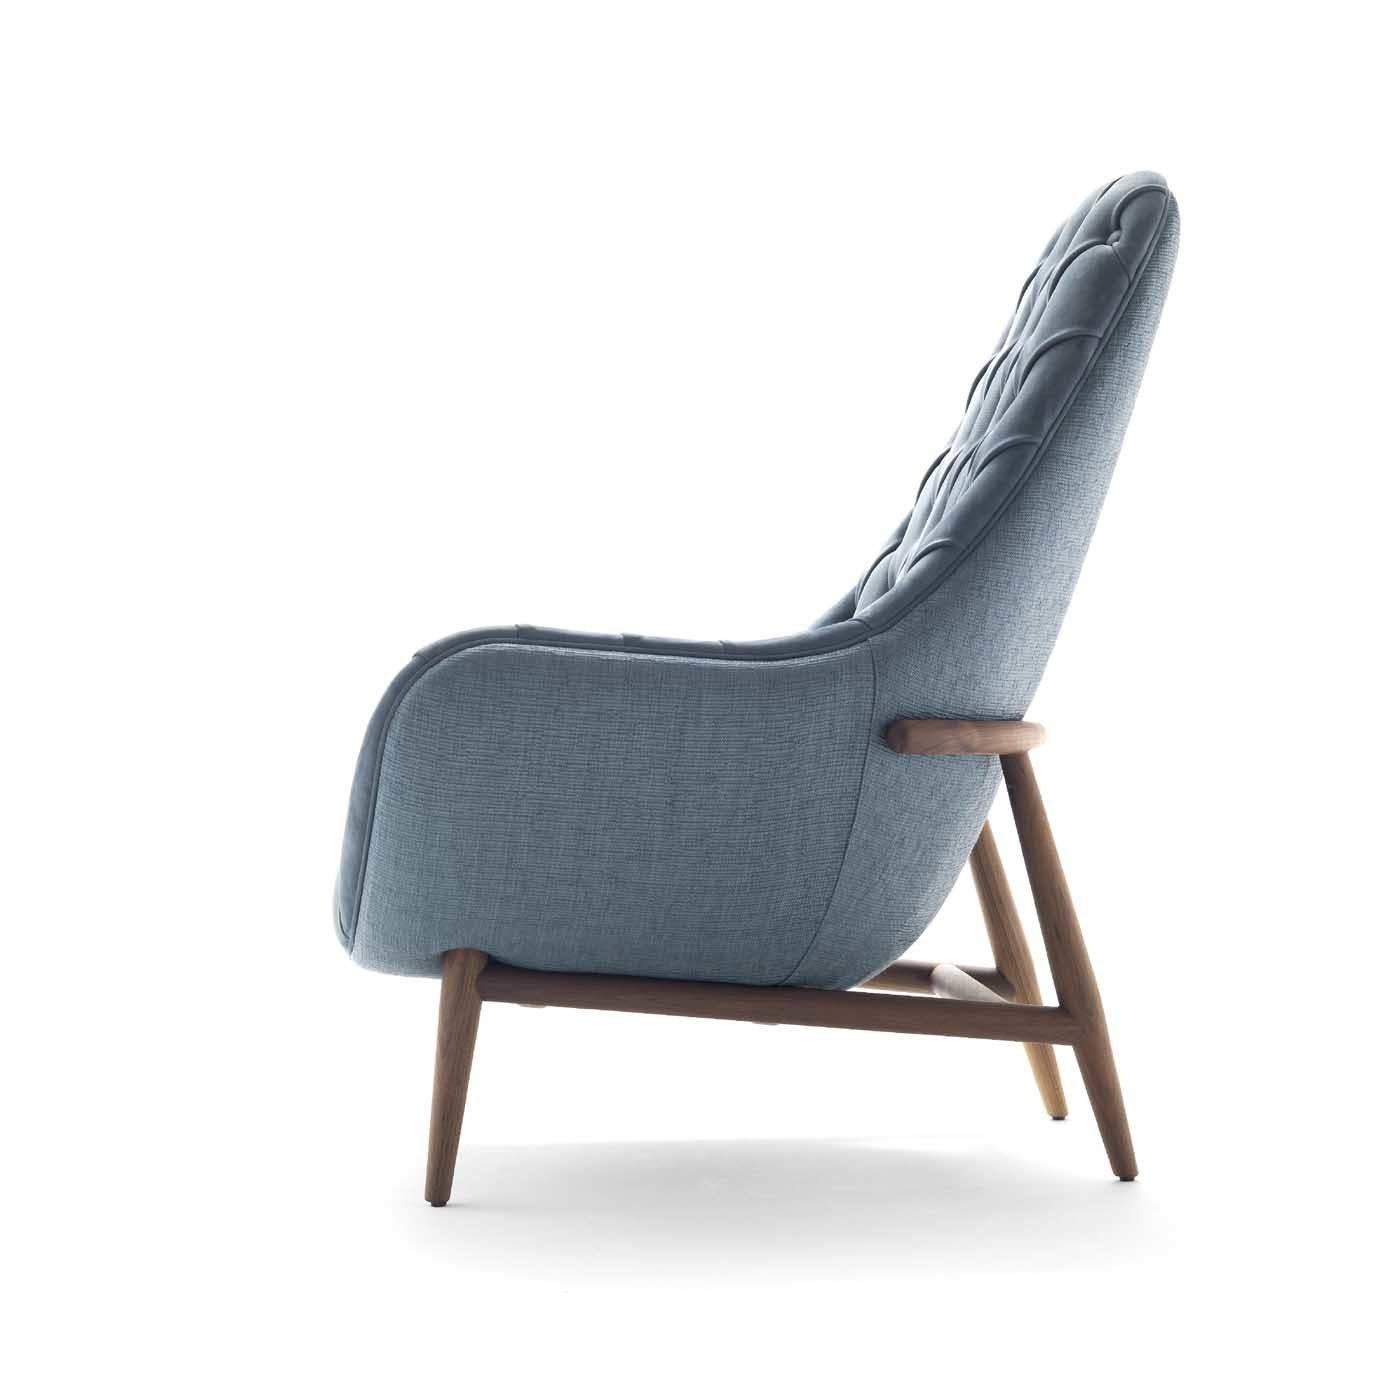 This elegant armchair combines the charming curves of mid-century design with an elegant tufted texture adorning the enveloping high back and diagonal armrests. Comfortable and welcoming, this silhouette is an ideal addition to a modern study or